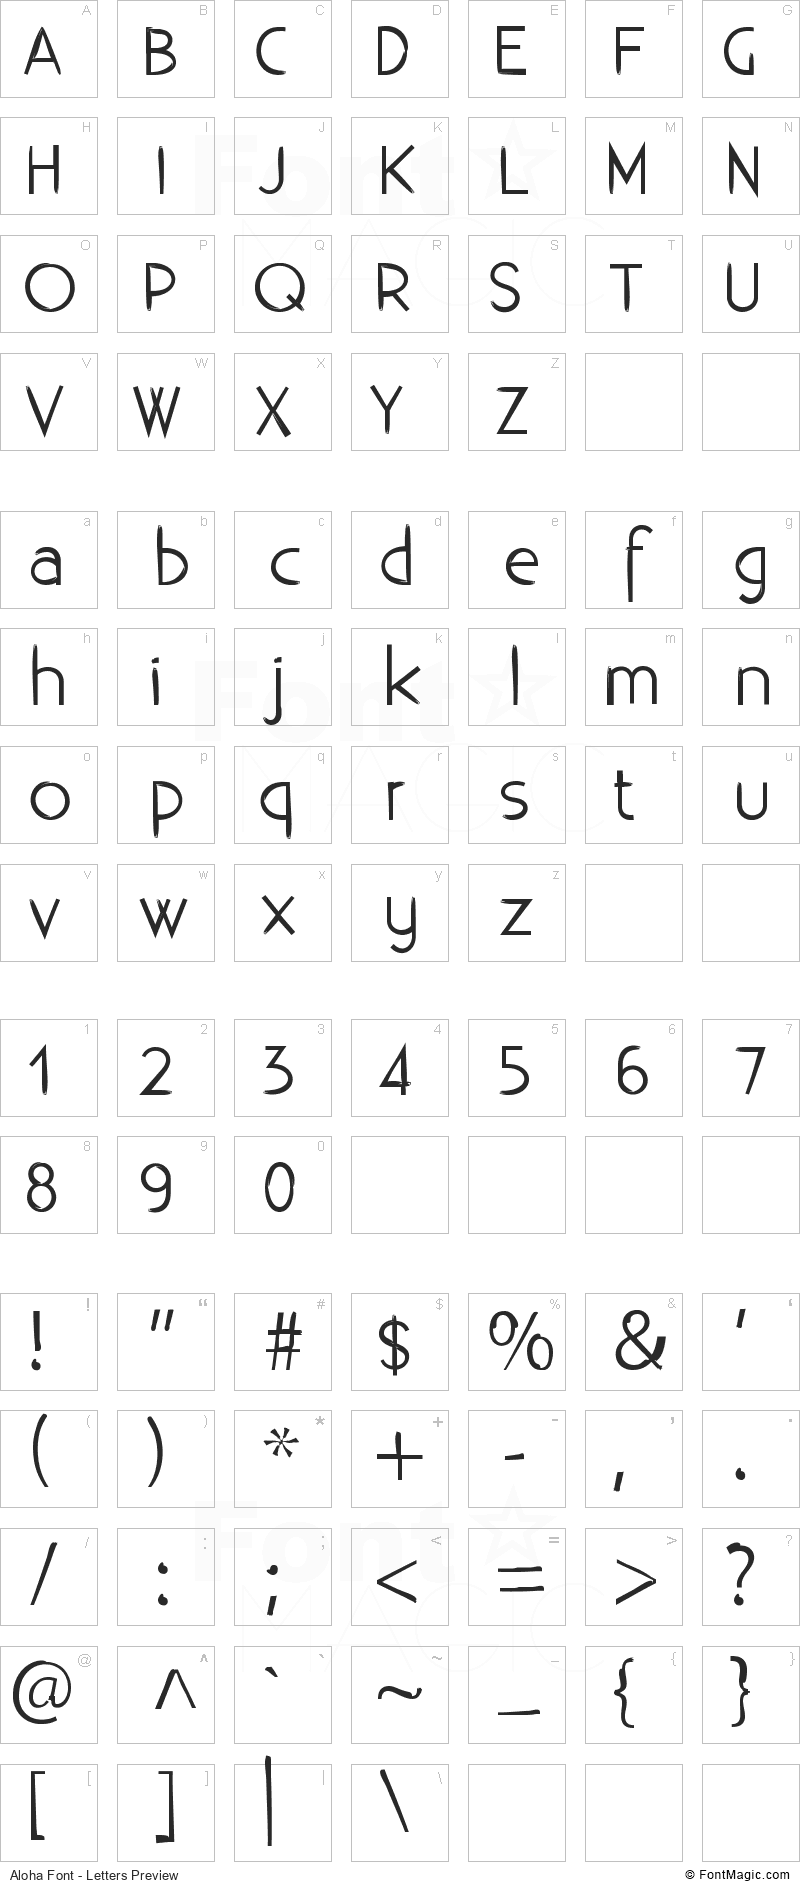 Aloha Font - All Latters Preview Chart